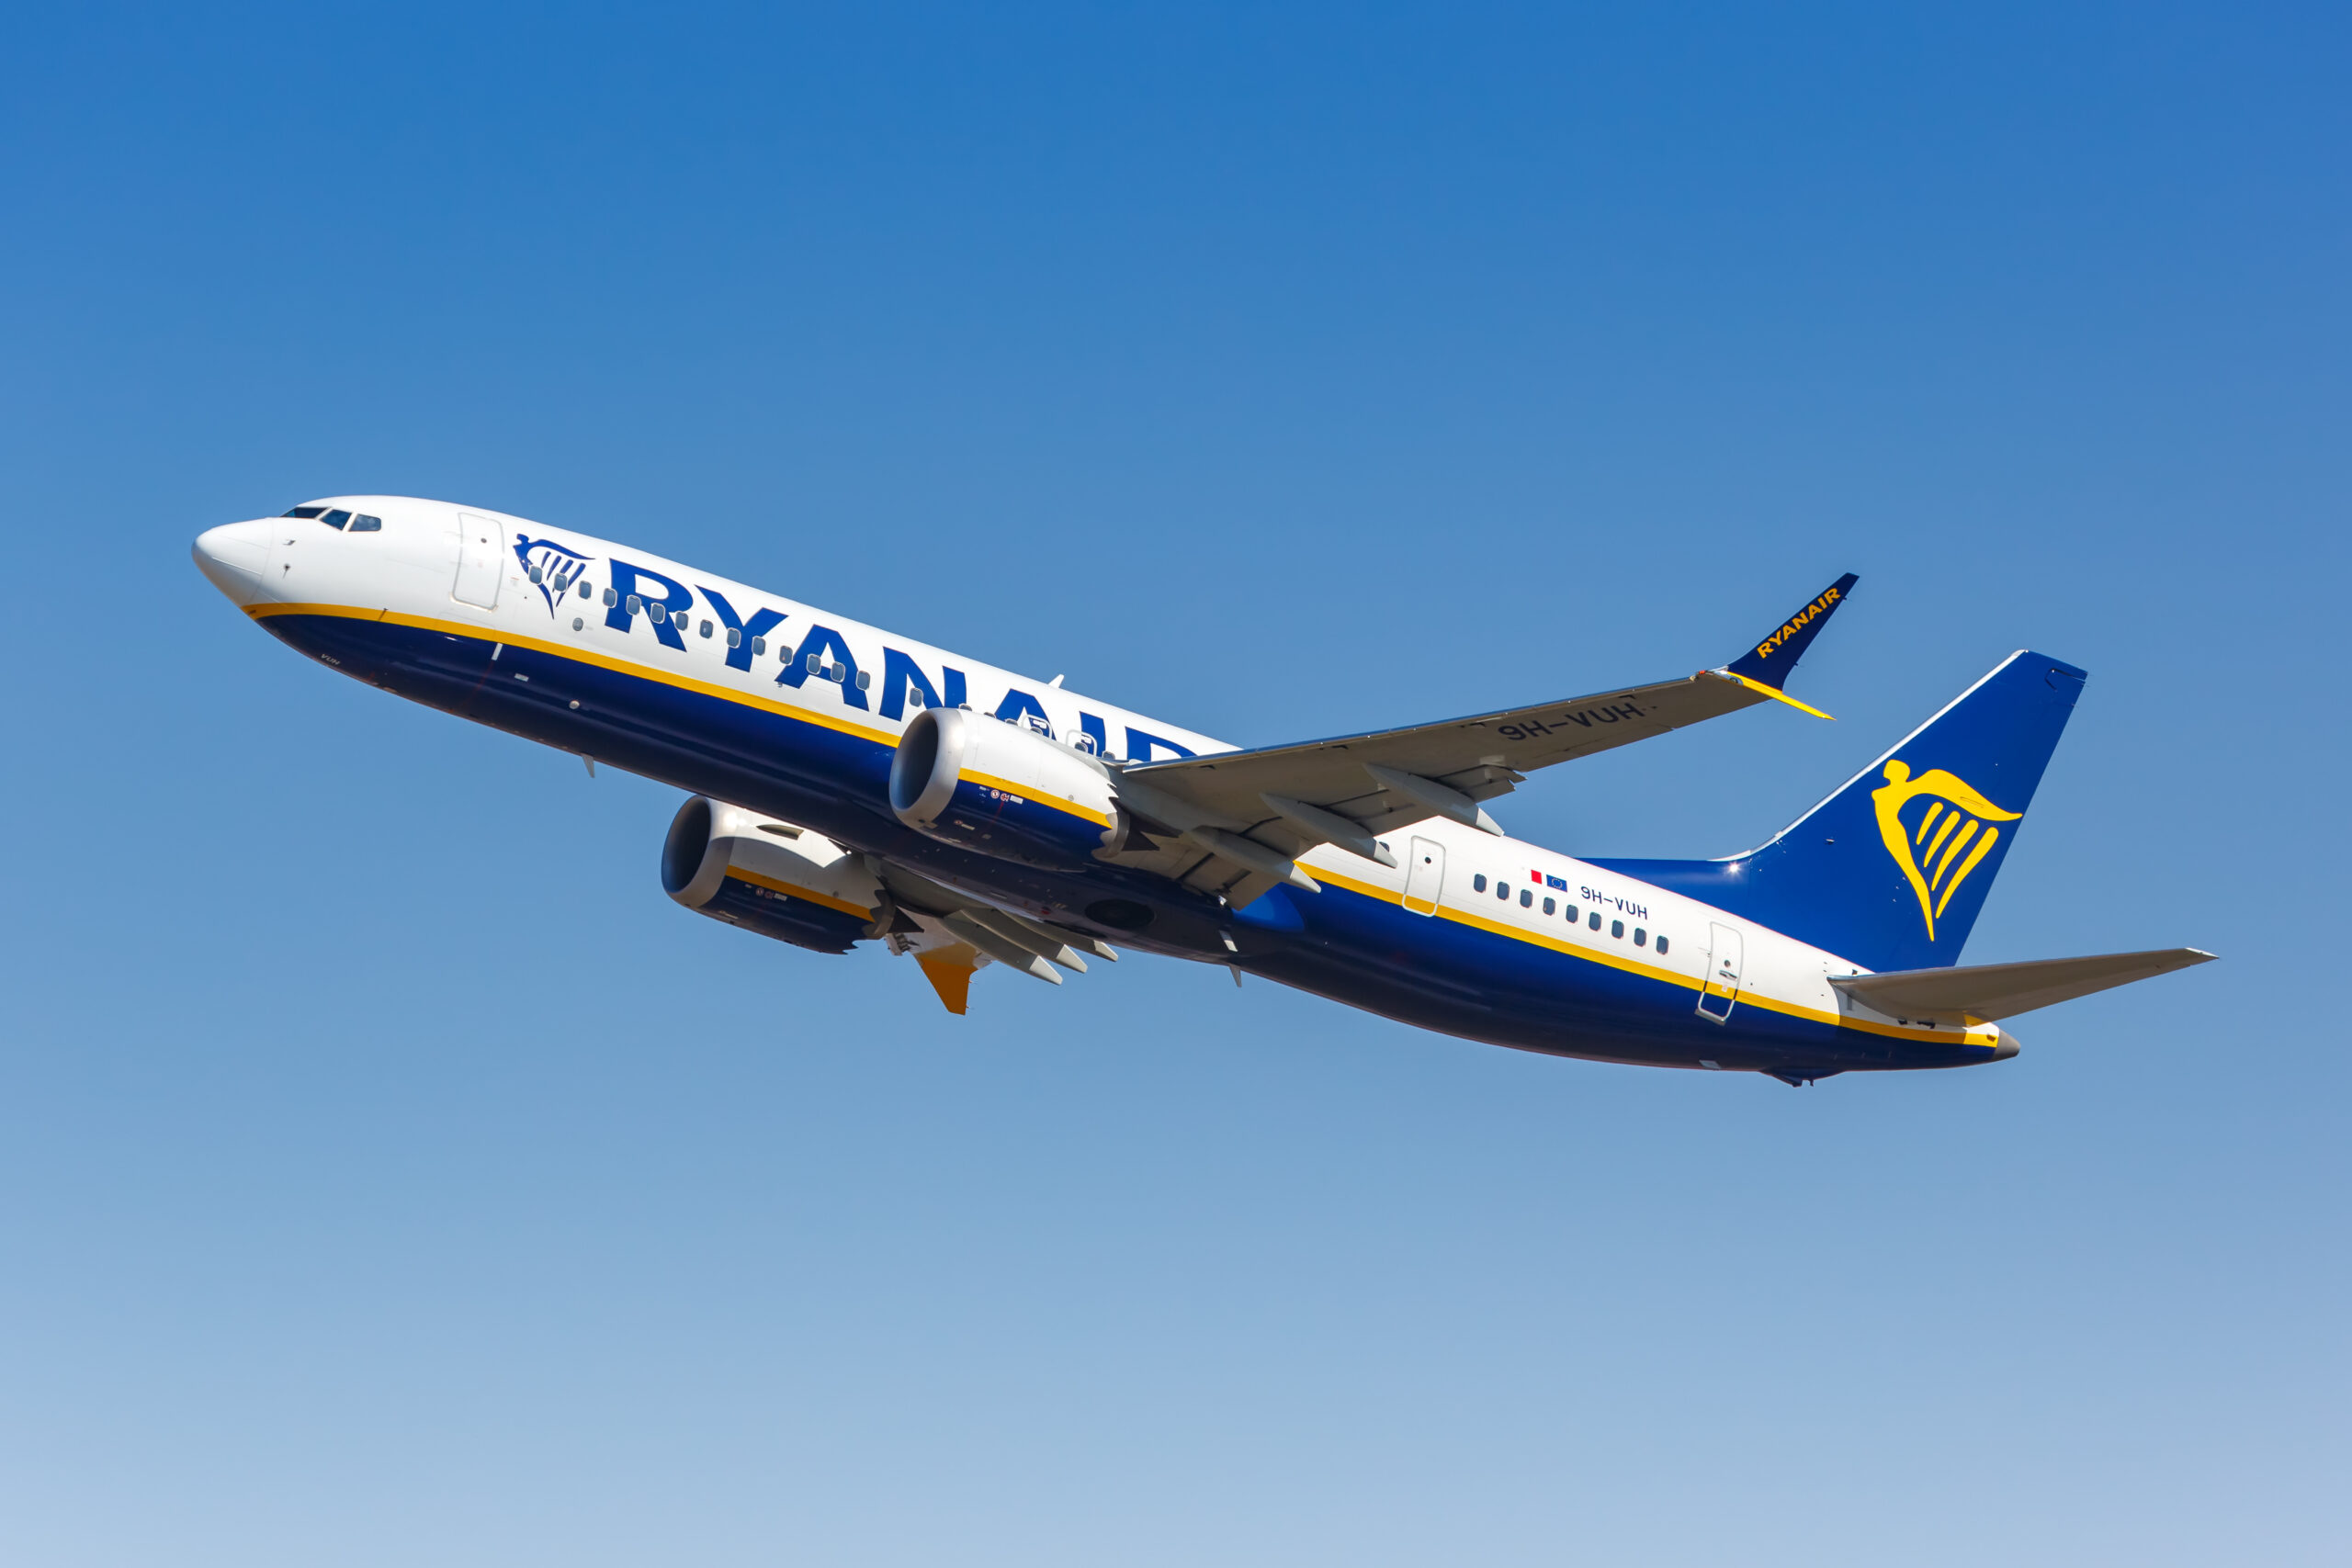 RyanAir-Aircraft-Taking-Off-In-Clear-Skies